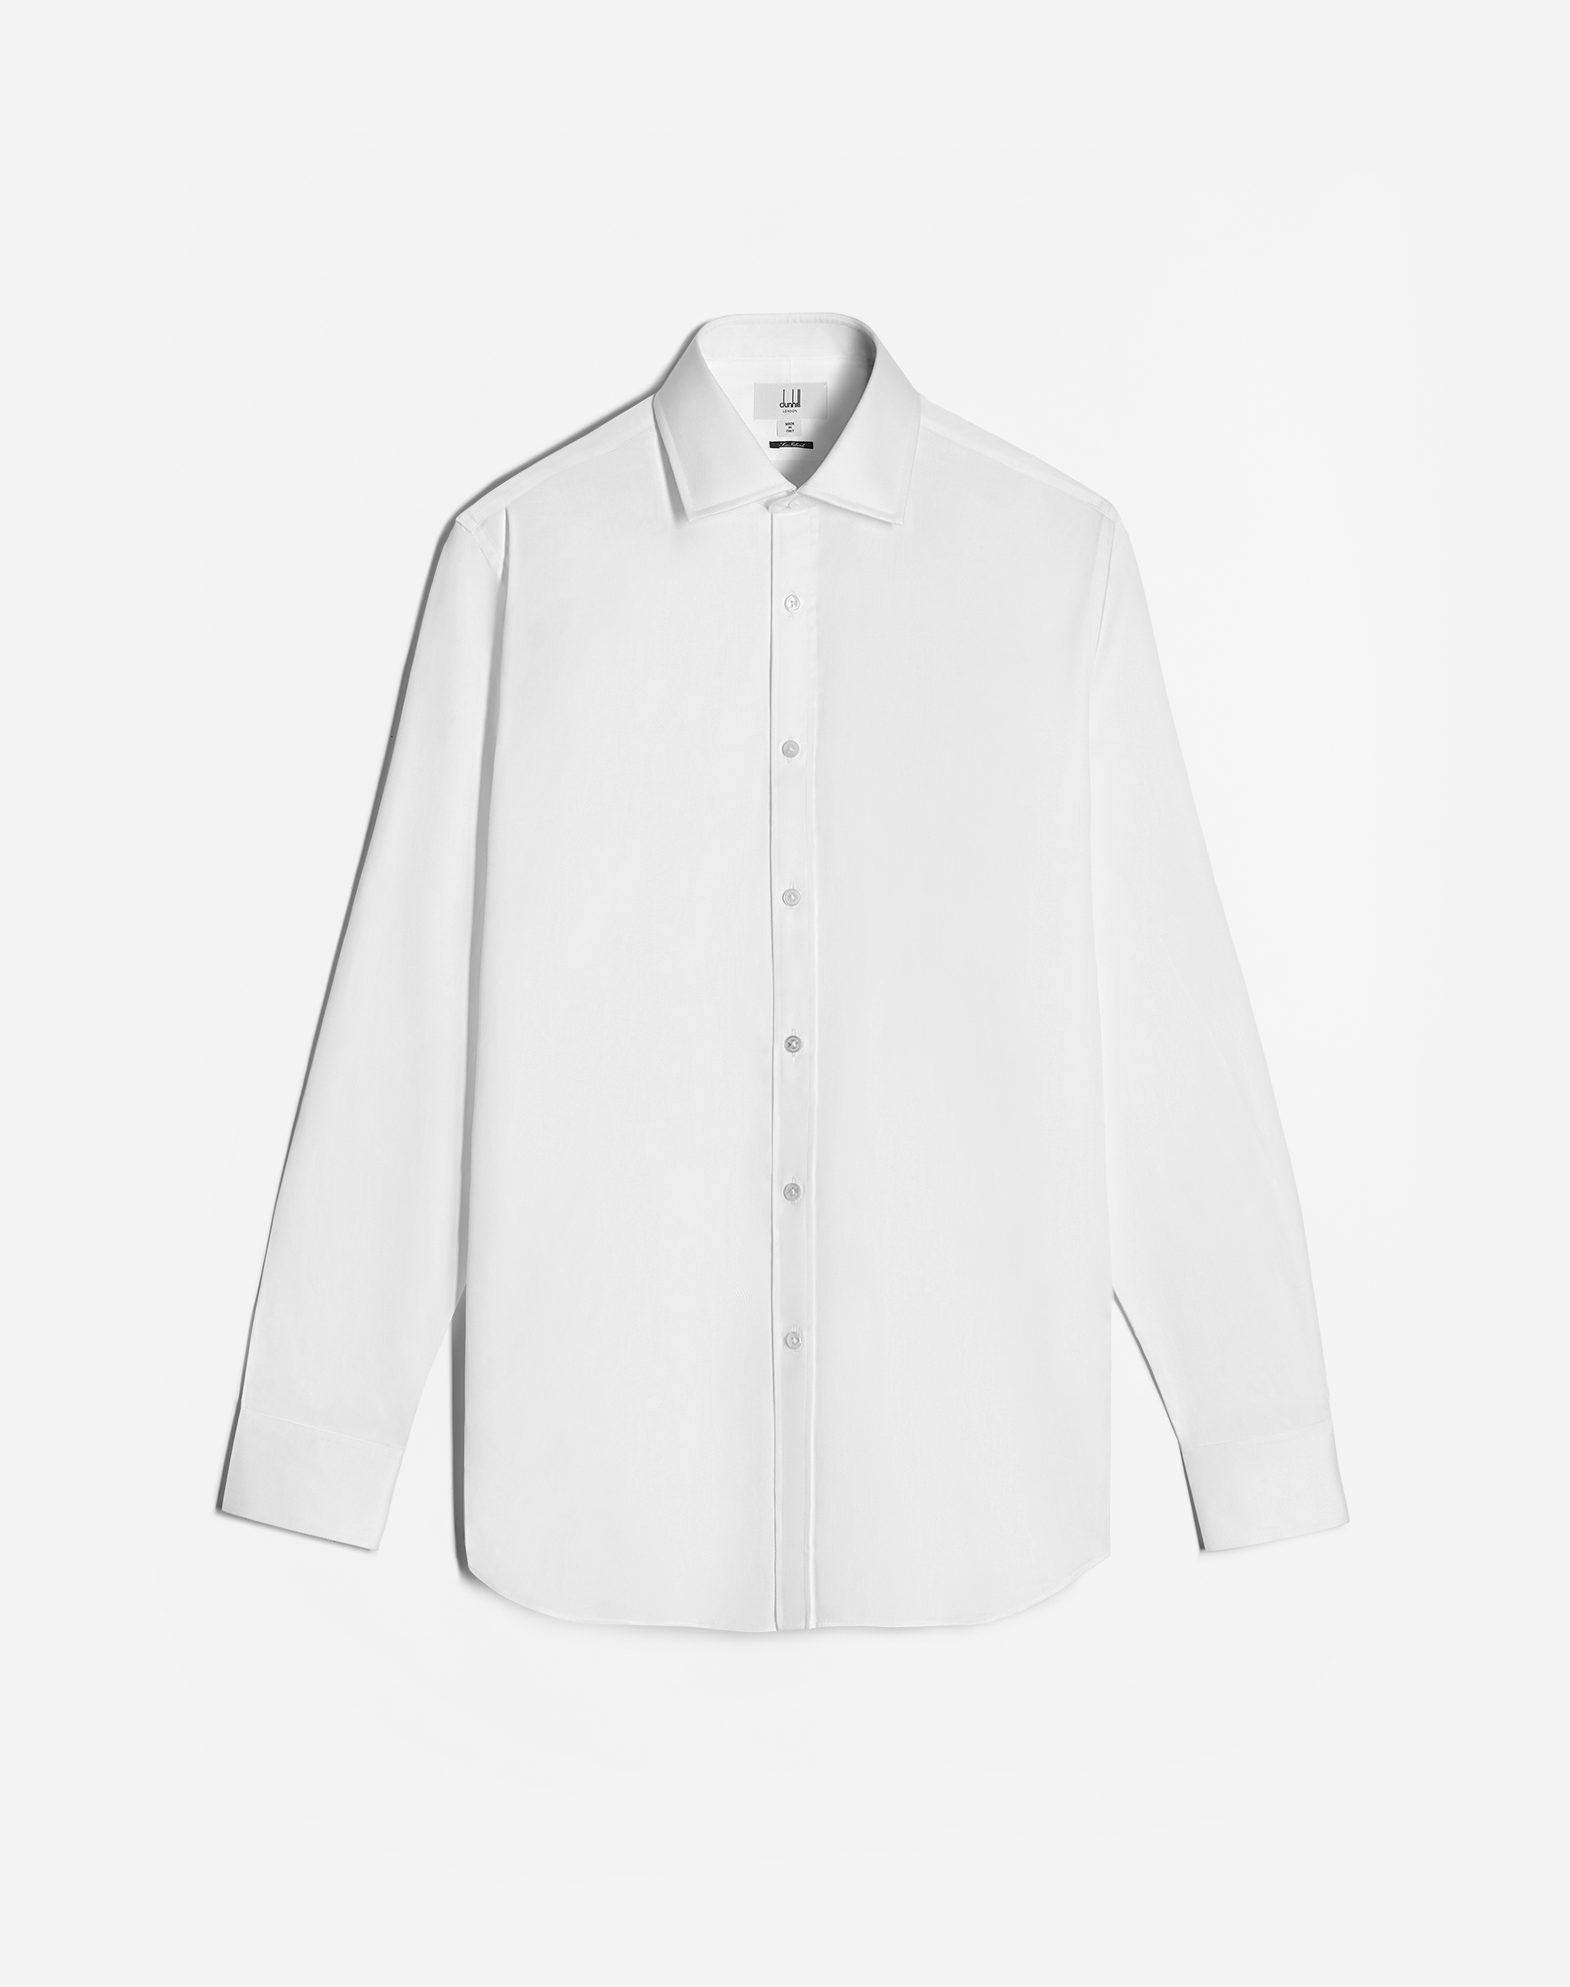 Dunhill Sea Island Cotton Formal Shirt In White